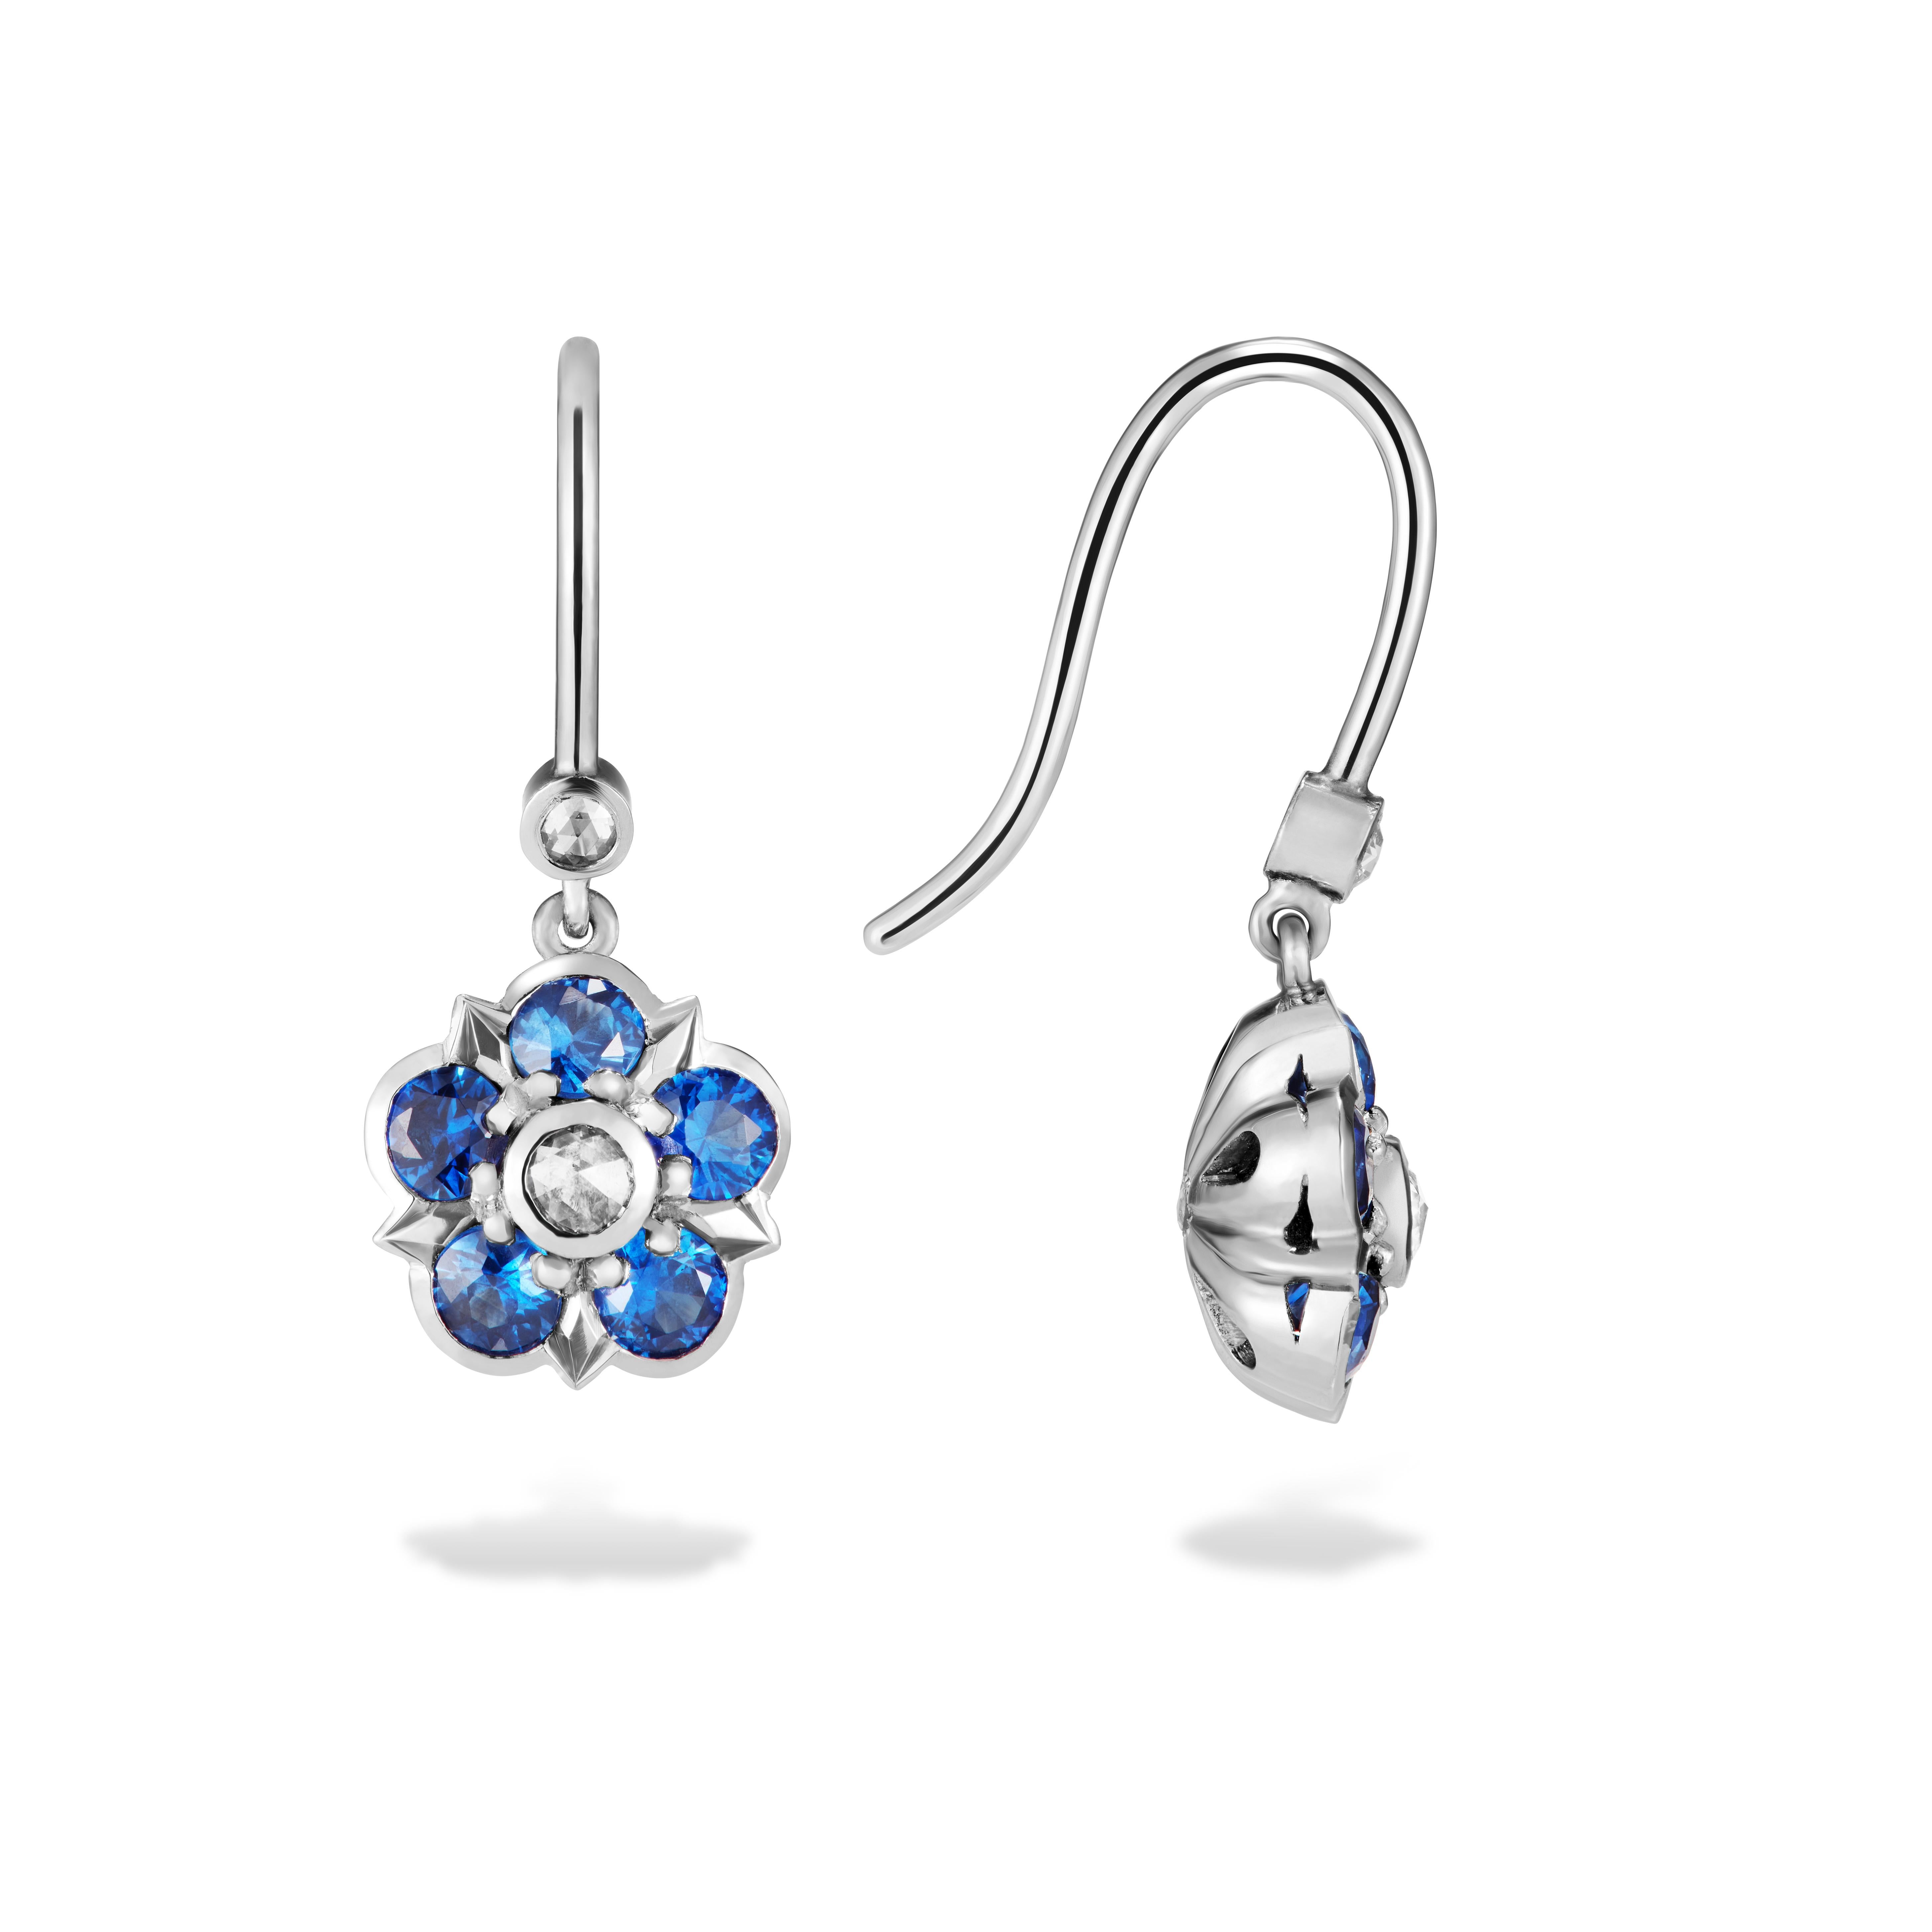 These beautiful sapphire and rose cut diamond Rose earrings feature classic sapphires surrounding a scintillating rose cut diamond. The earrings are suspended from platinum hooks with another lovely rose cut diamond. In true Aril Jewels style, the